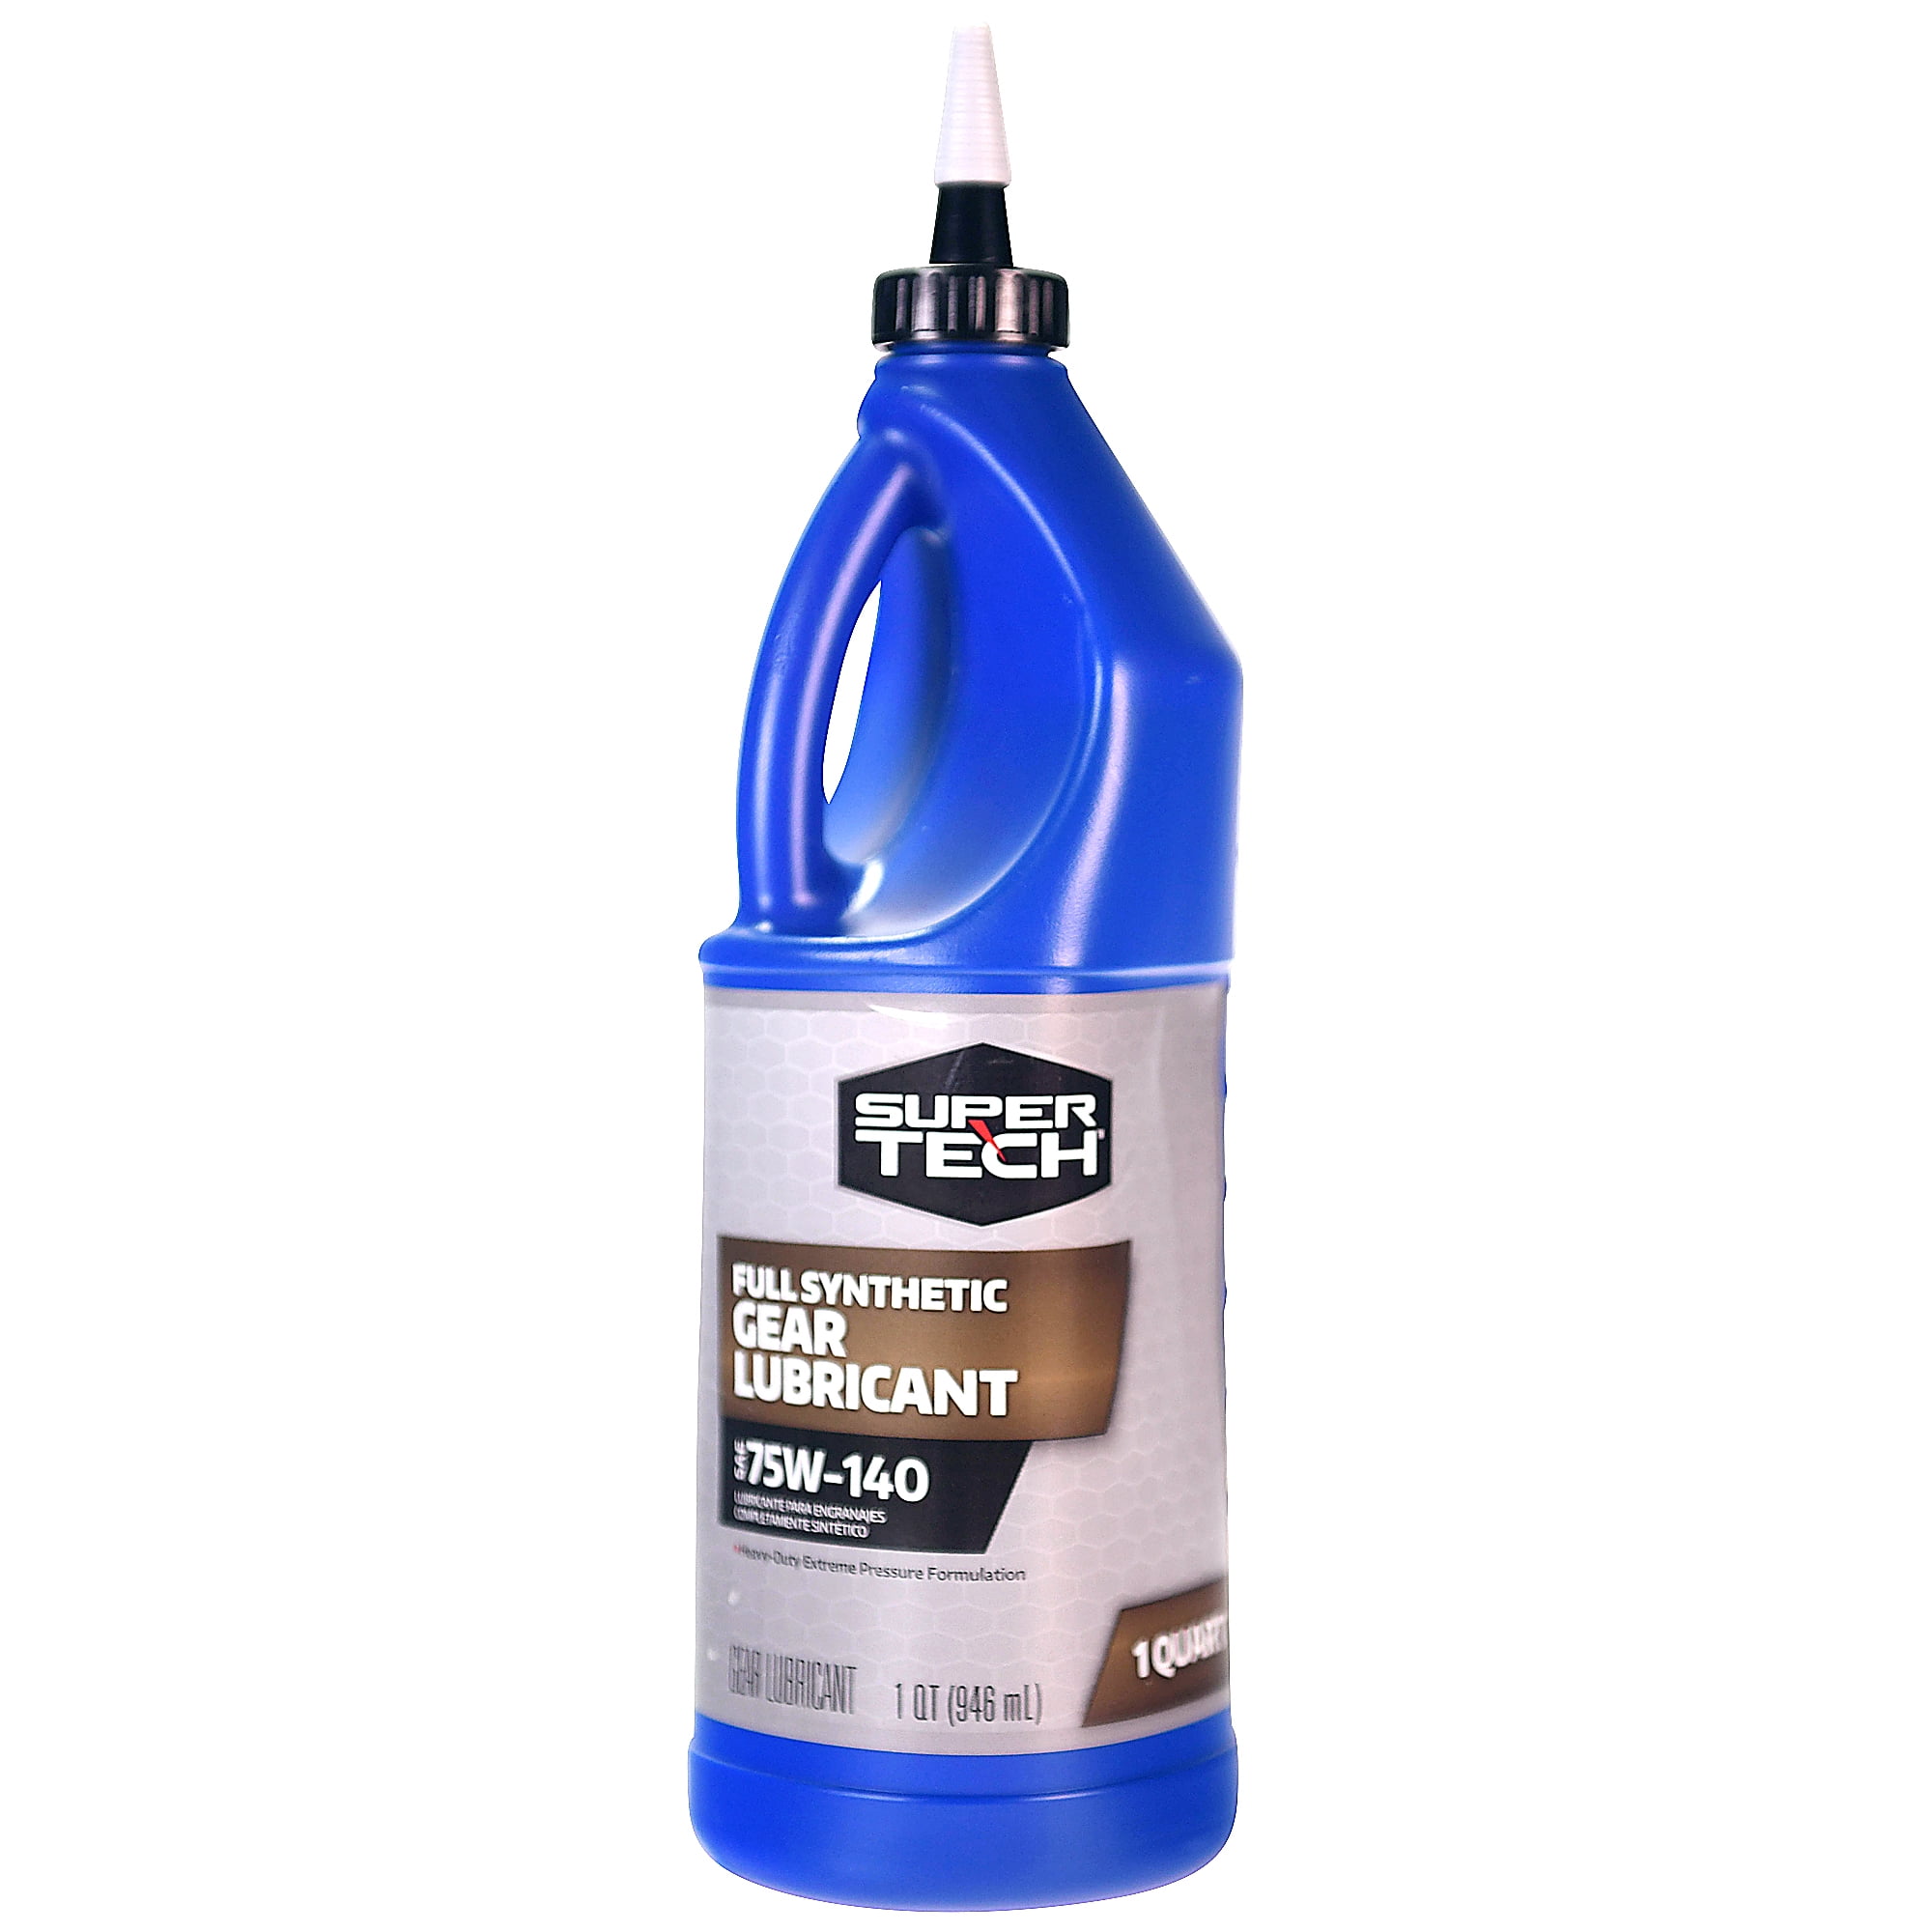 Super Tech Full Synthetic Gear Lubricant SAE 75W-140, 1 Quart - Walmart.com - Walmart.com How To Get Gear Oil Out Of Clothes